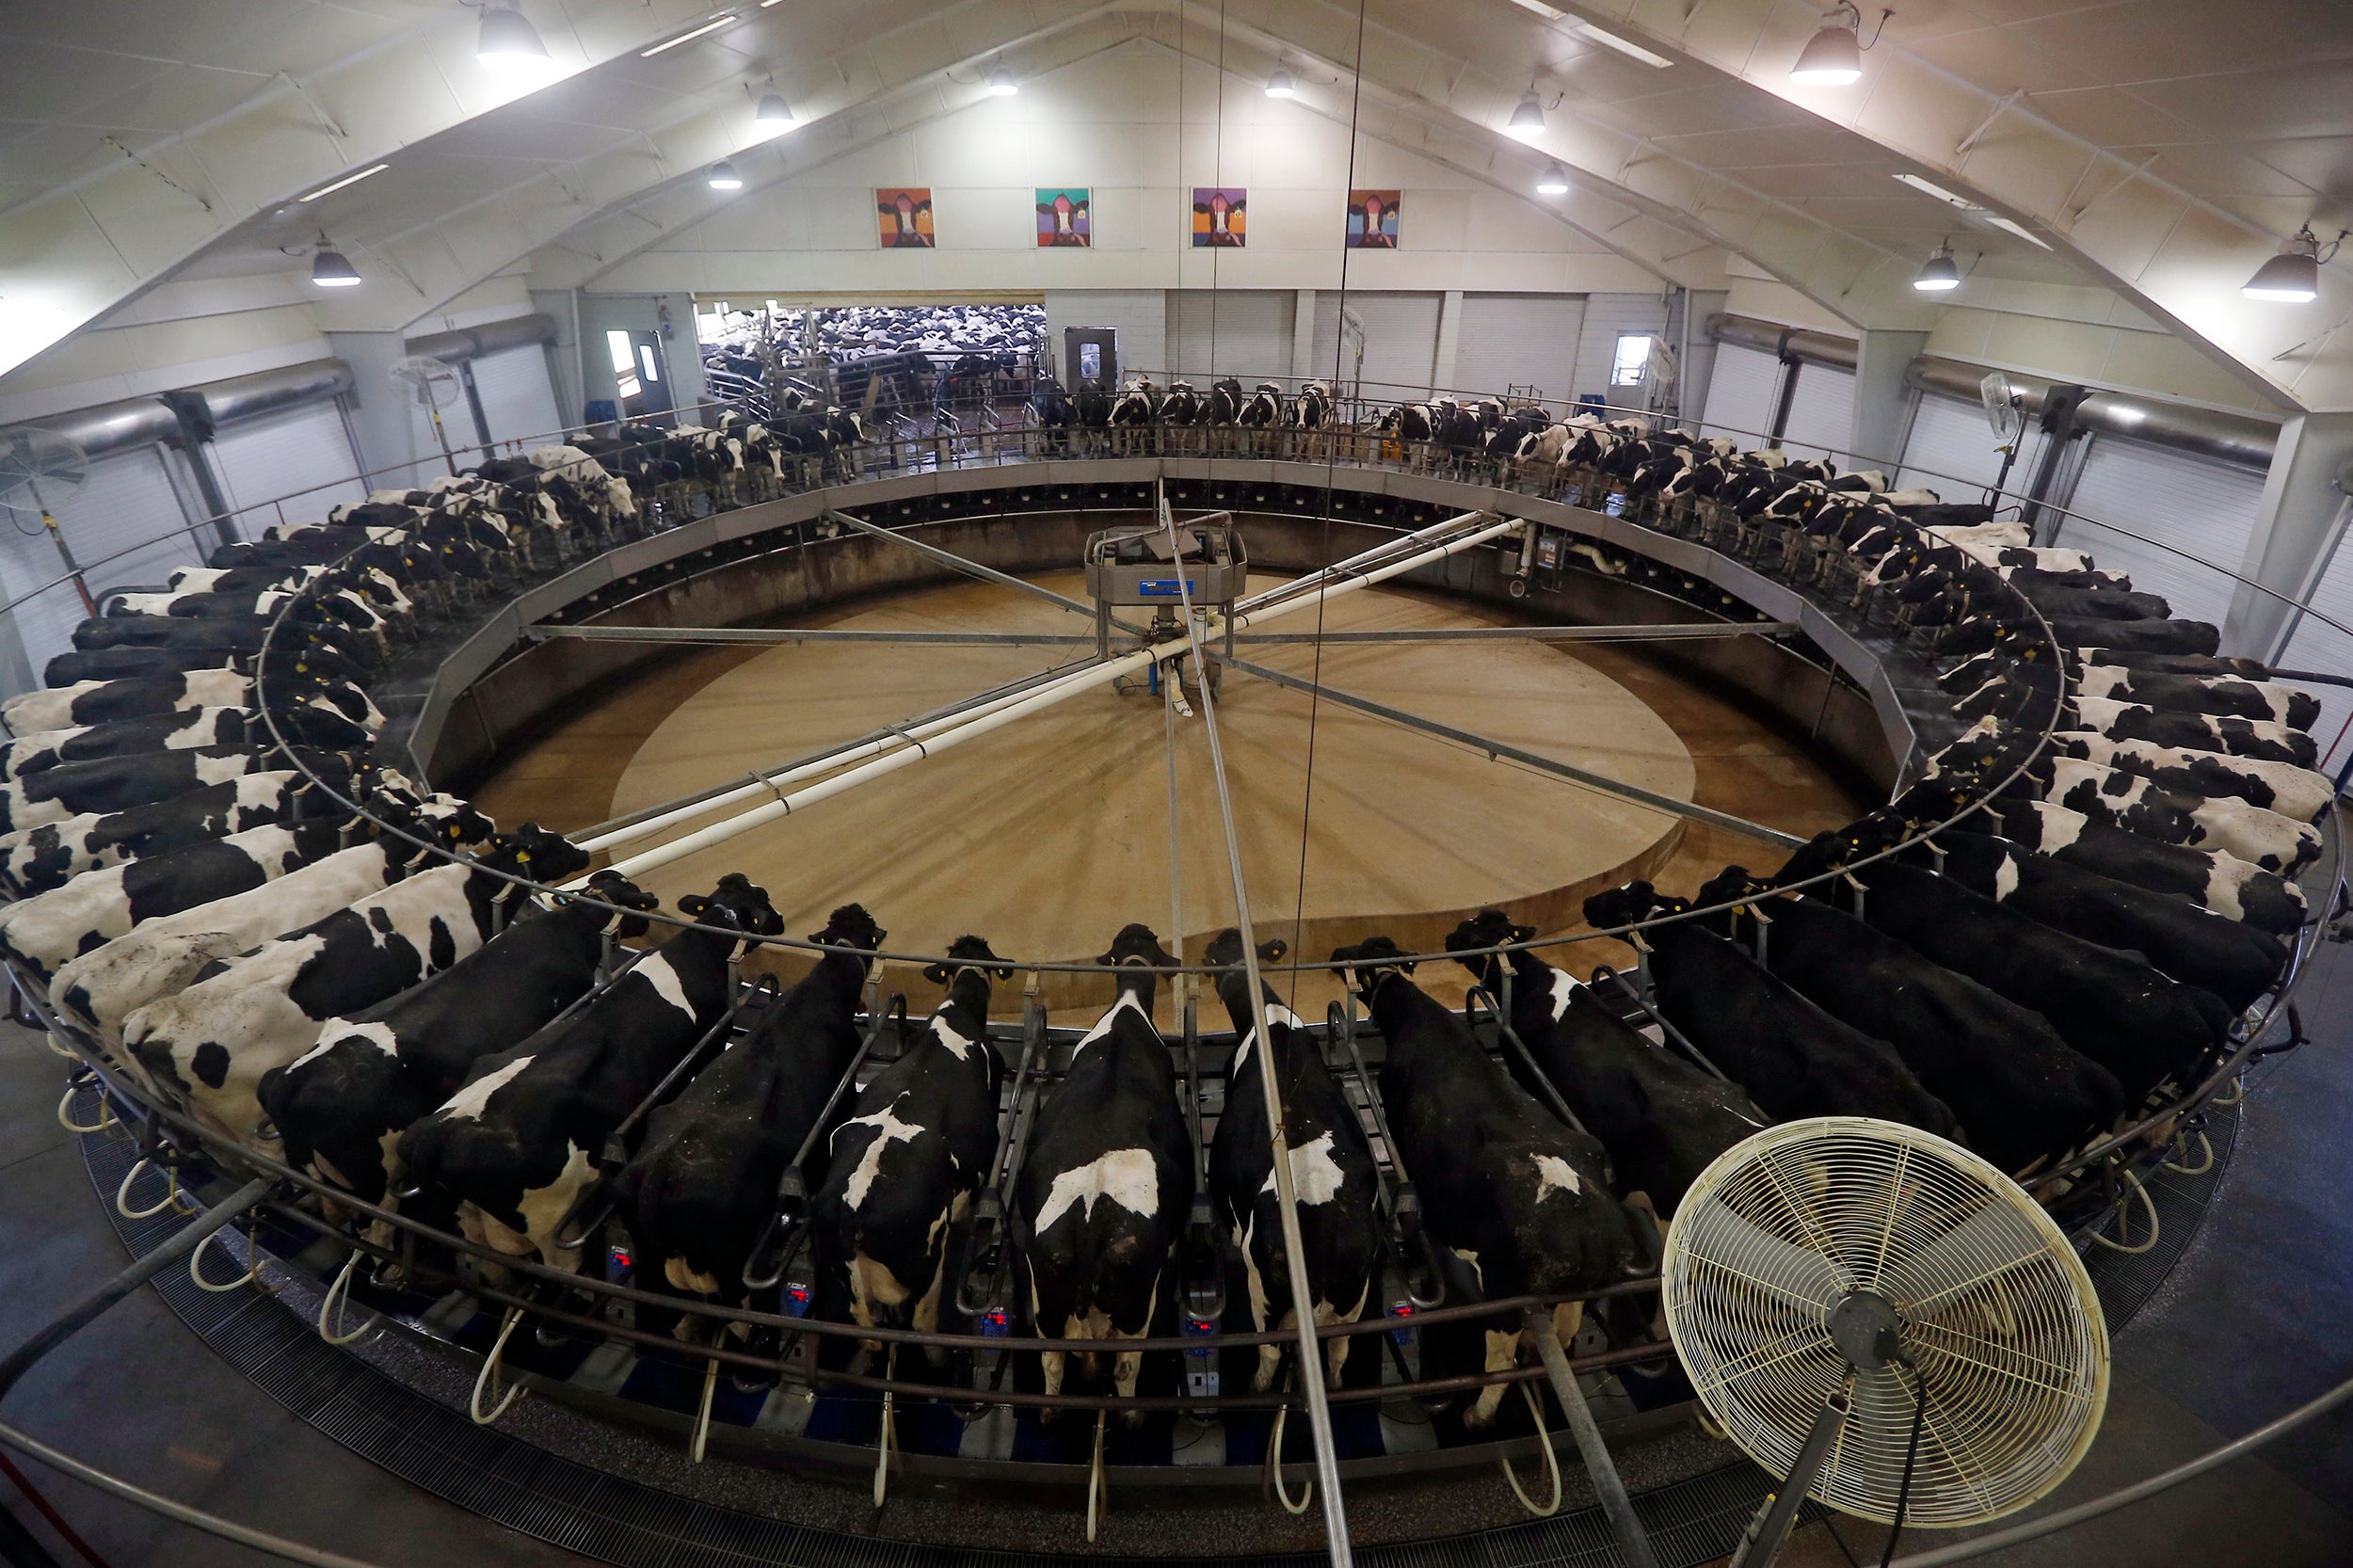 Cows in a milking carousel in the US, where safety standards for cancer-causing toxins are lower than the EU